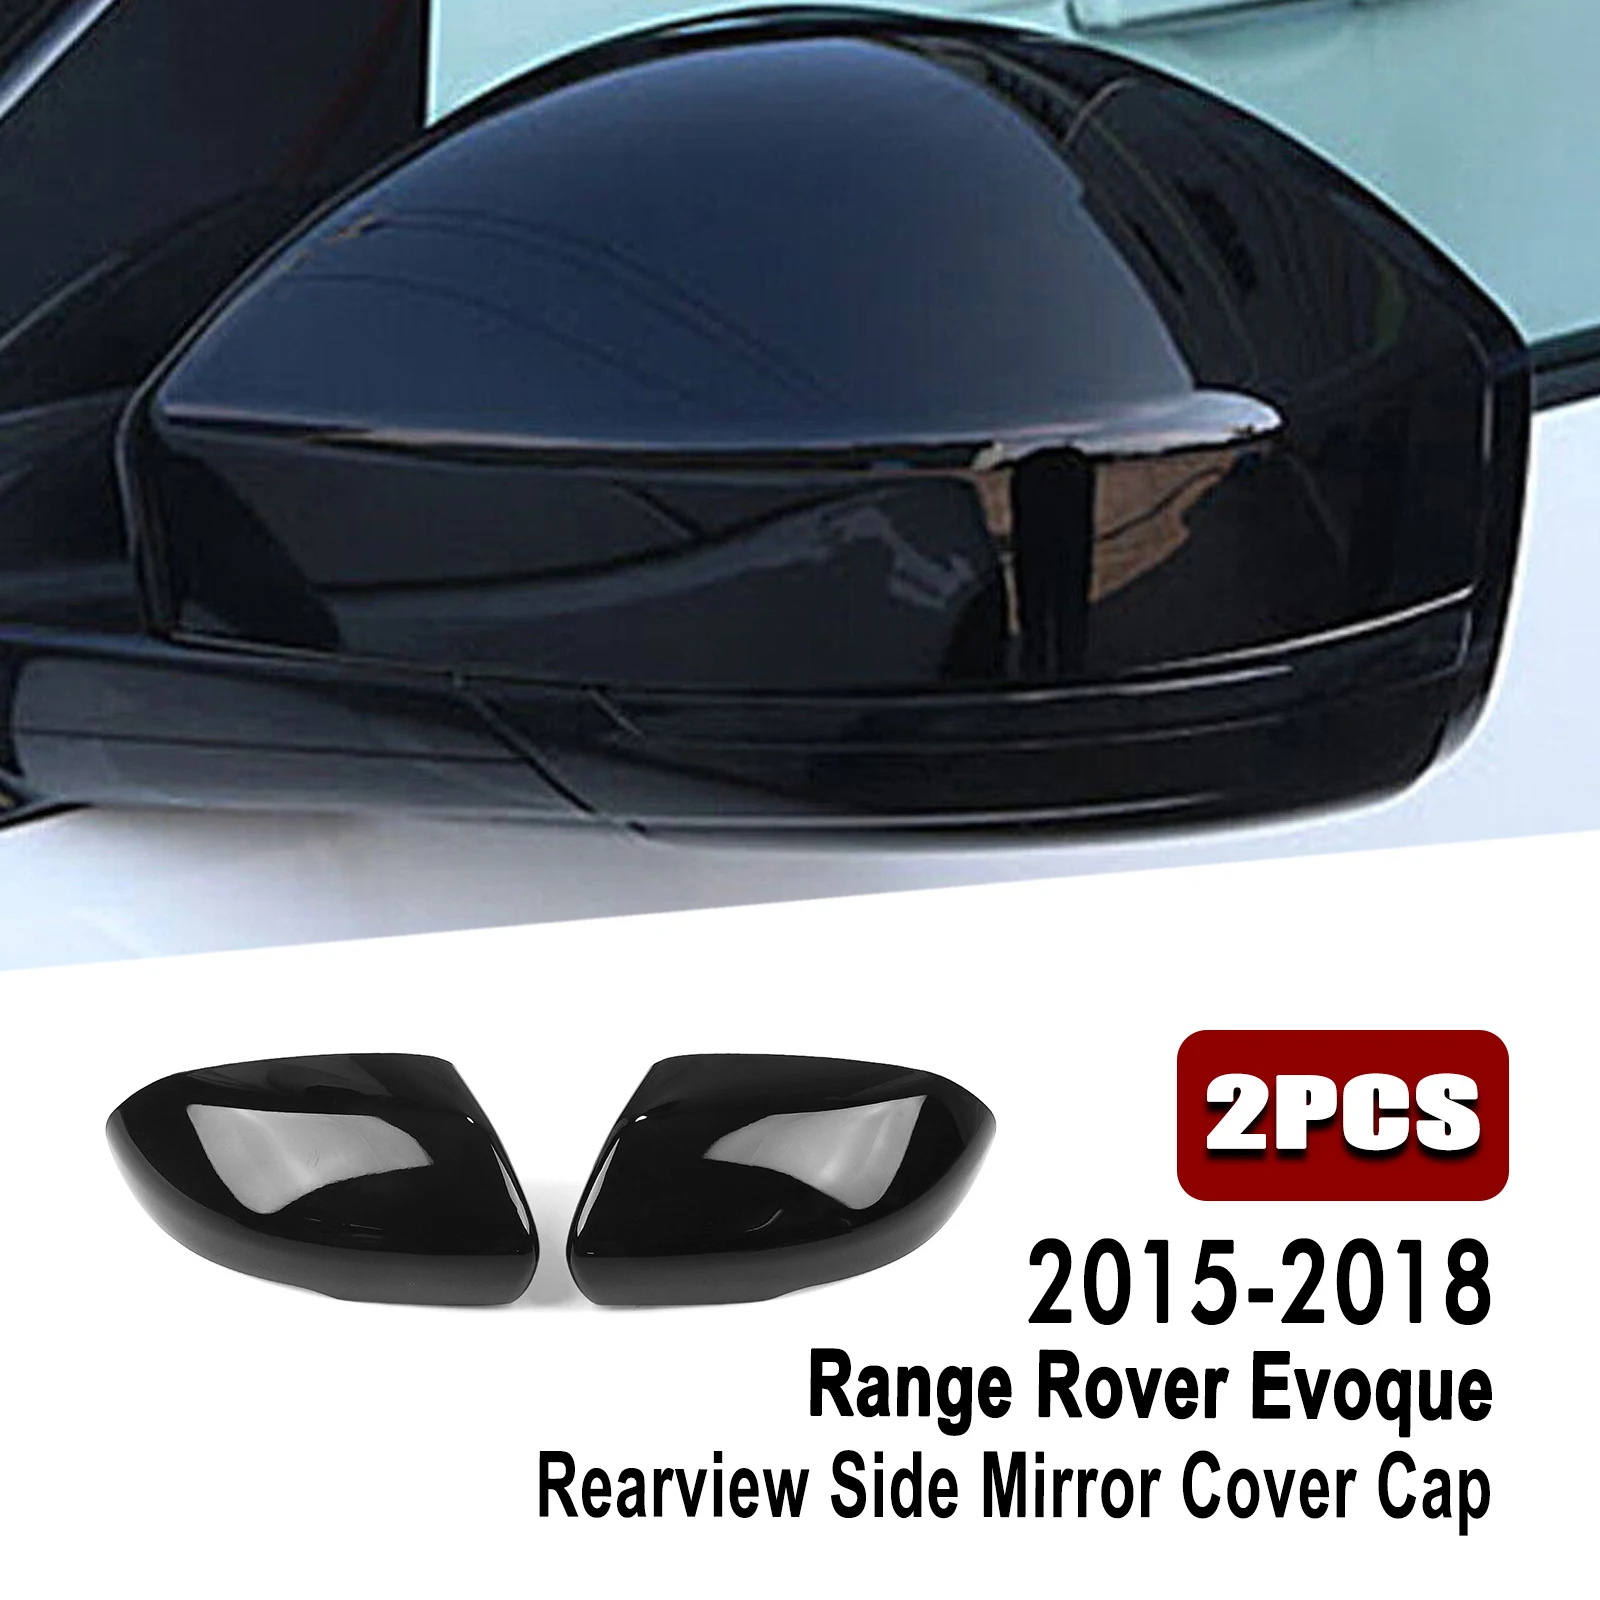 

Mirror Cover For Land Rover Range Rover Evoque 2015-2018 Gloss Black Exterior Car Rear View Cap Rearview Shell Replacement Type